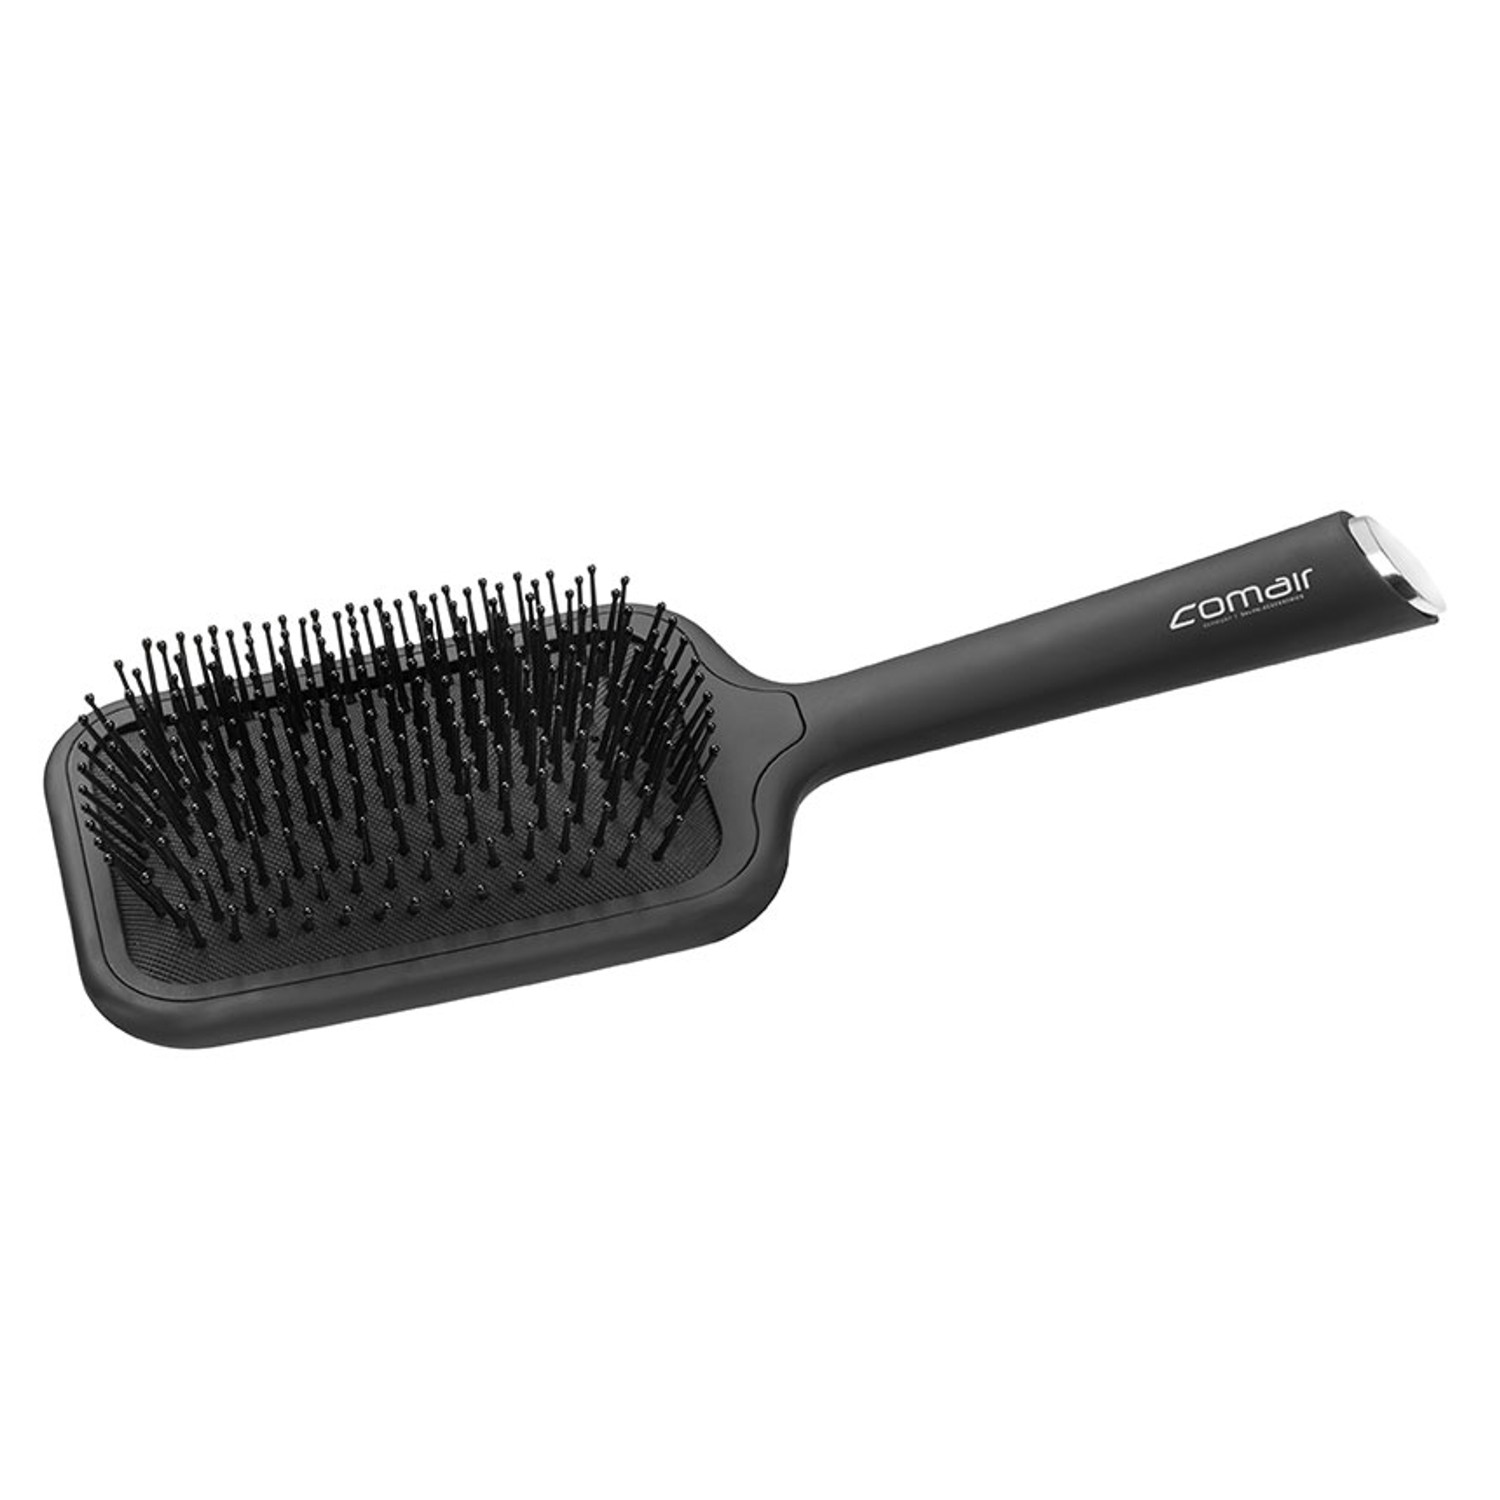 Comair Paddle Brush Black Touch